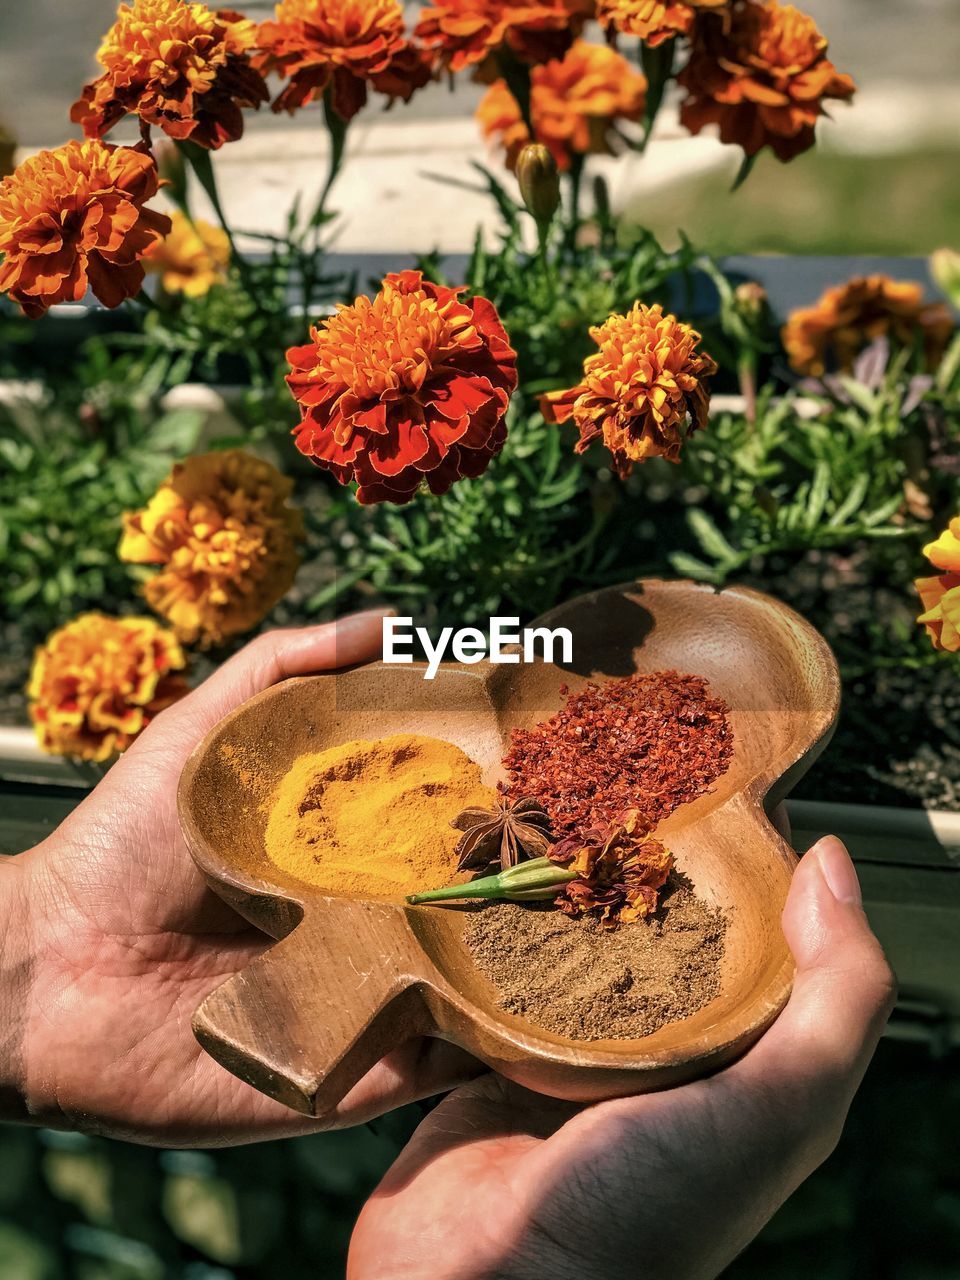 Midsection of person holding decorative, wooden container of spices against marigold plants.